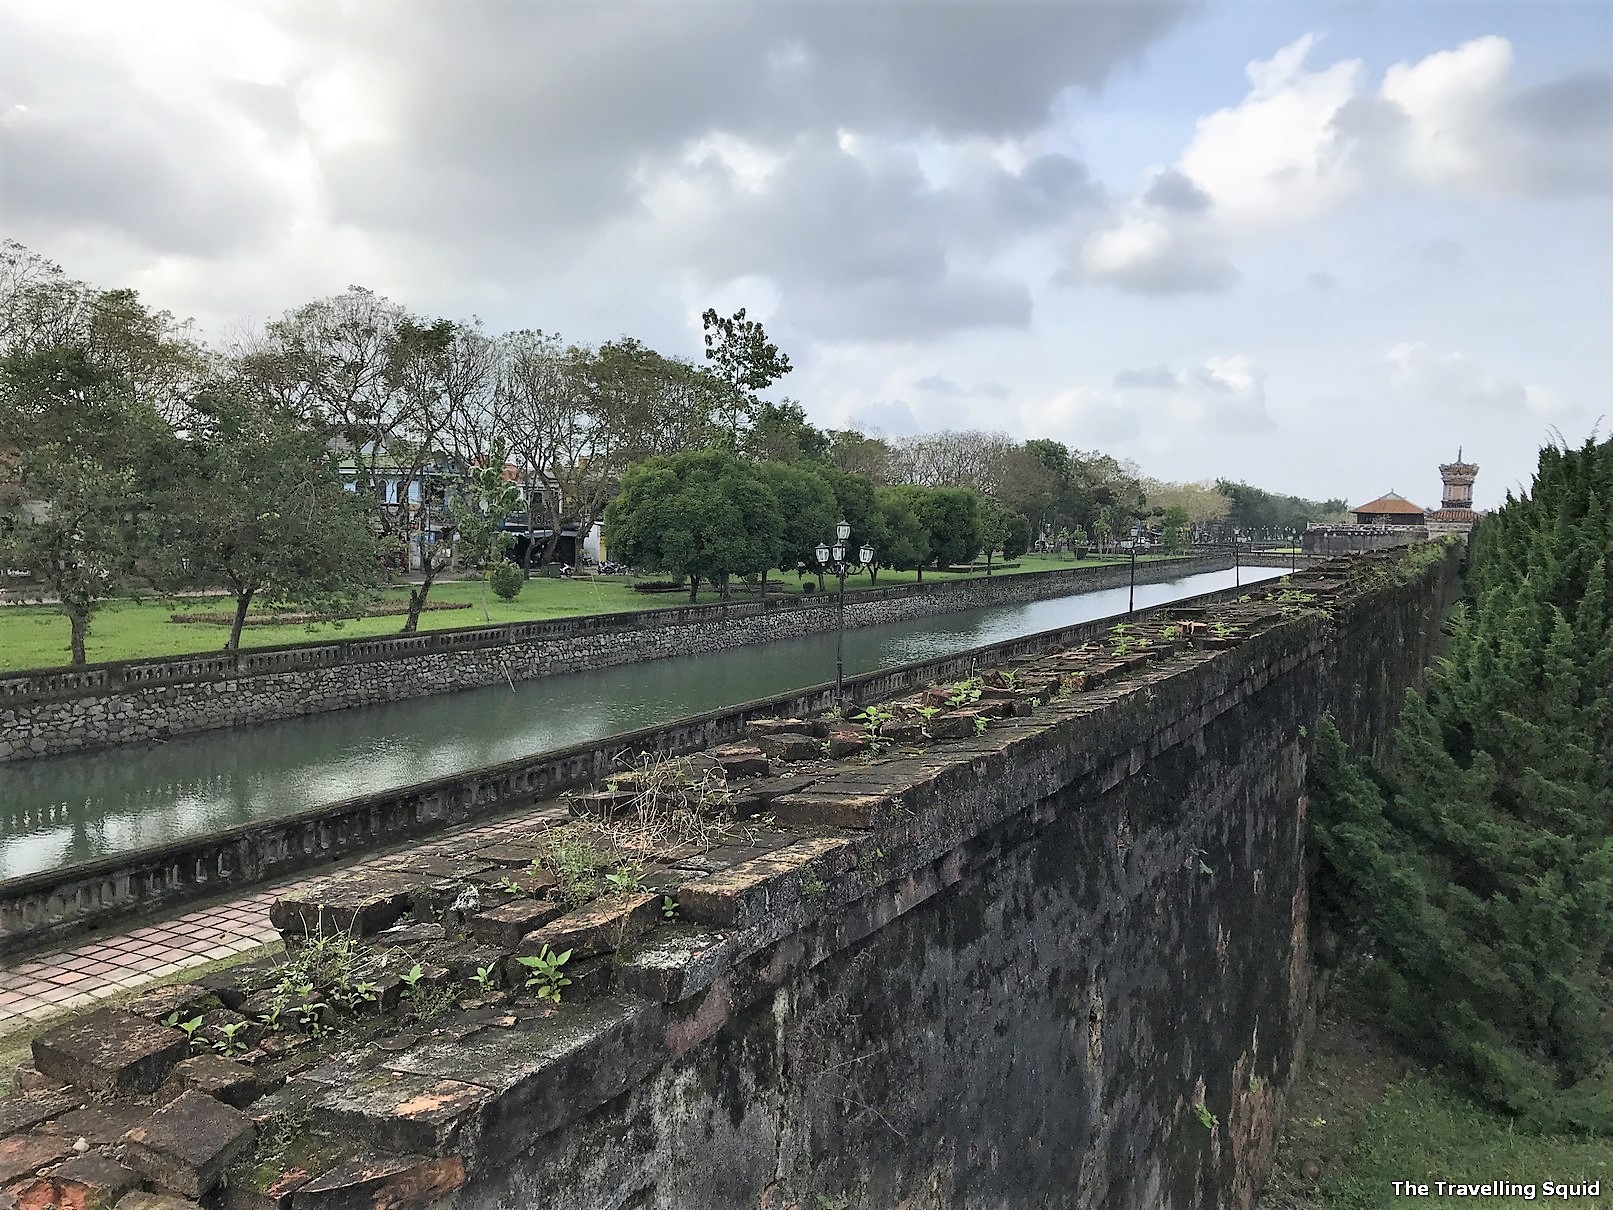 Unexpected sights at the Imperial City of Hue